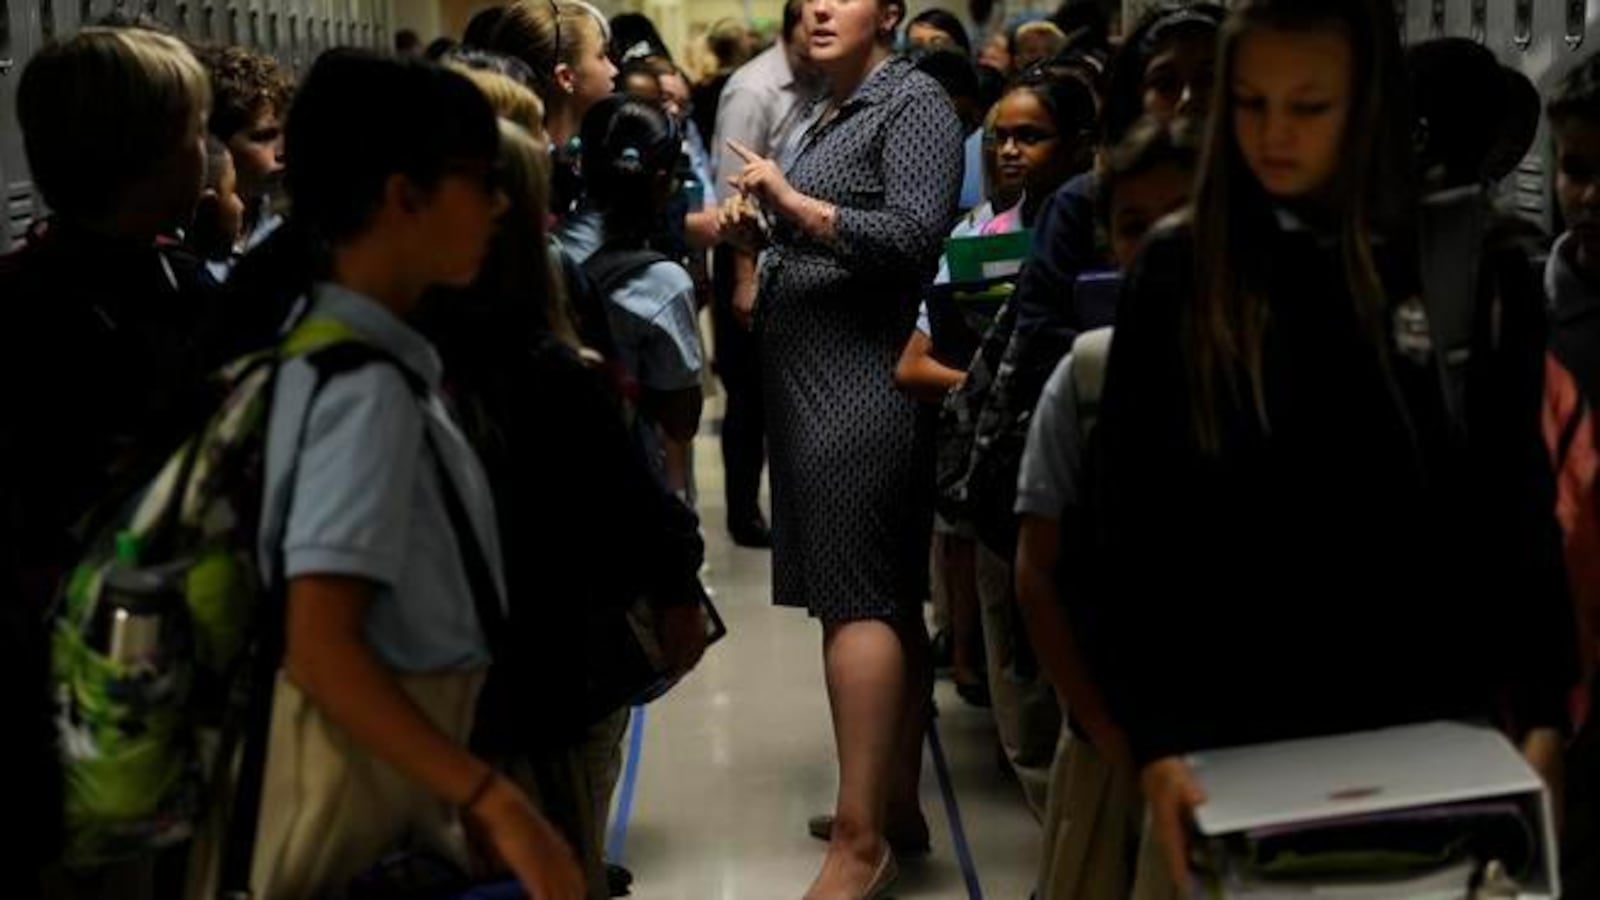 Katie Ethridge talks to her sixth grade science class in the hallway at DSST's Byers campus in 2014. The building reopened after $19 million in renovations paid for through Denver's 2012 bond (Denver Post file).